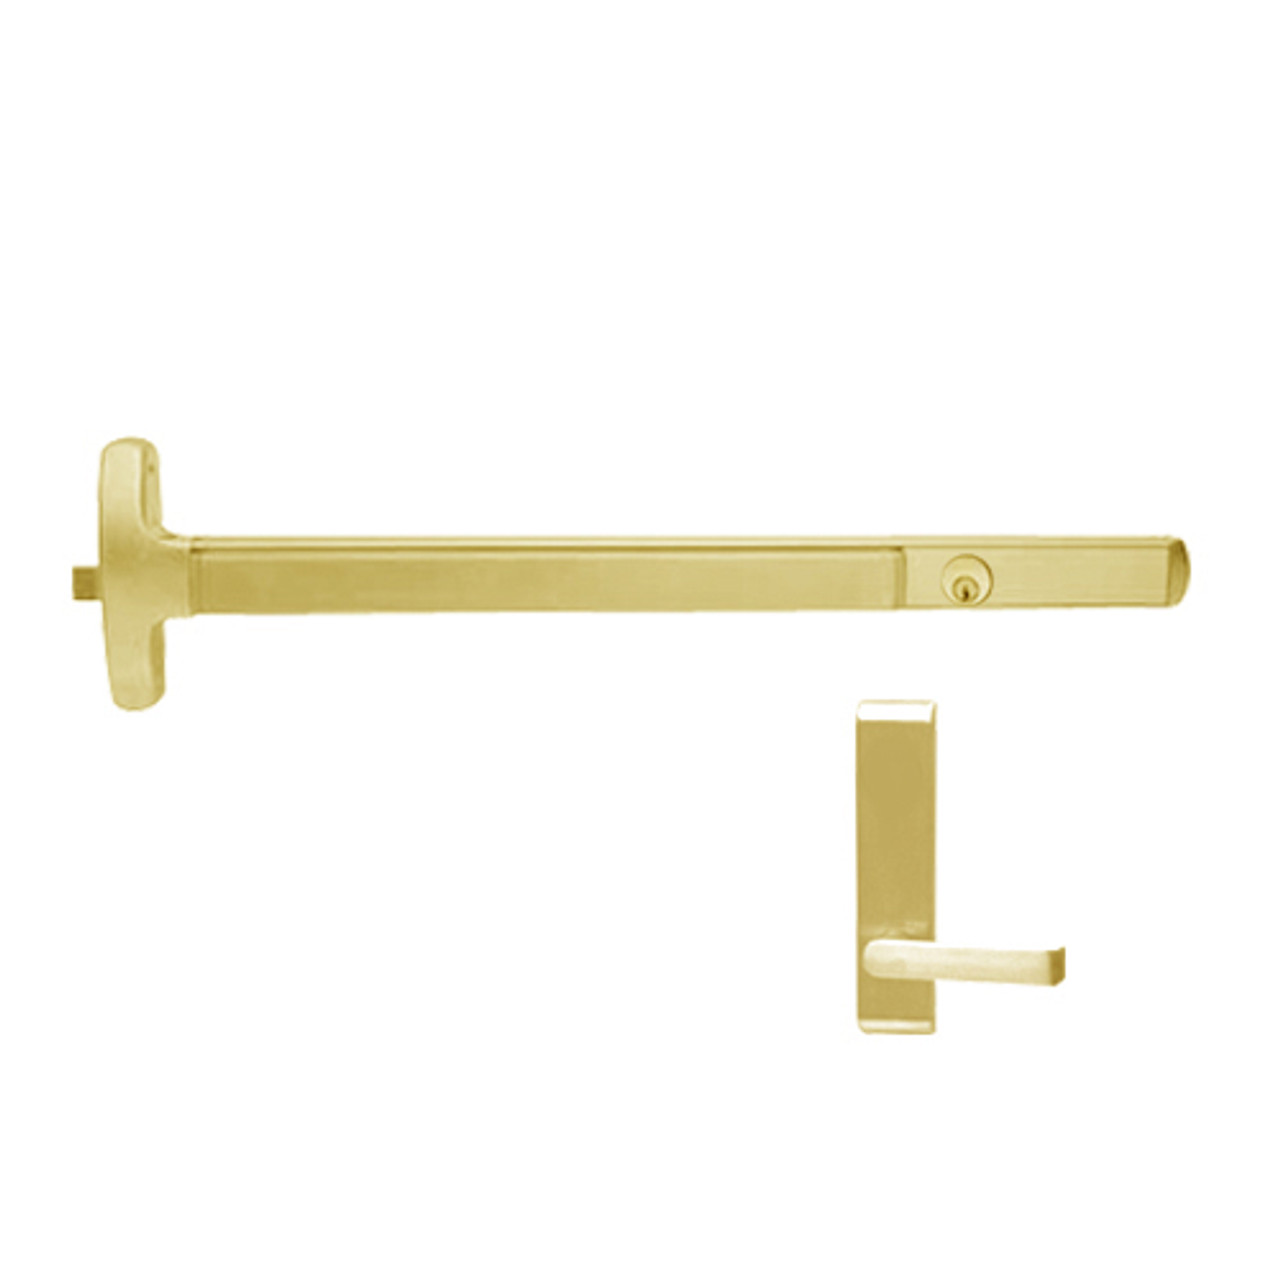 CD24-R-L-BE-DANE-US3-4-LHR Falcon Exit Device in Polished Brass